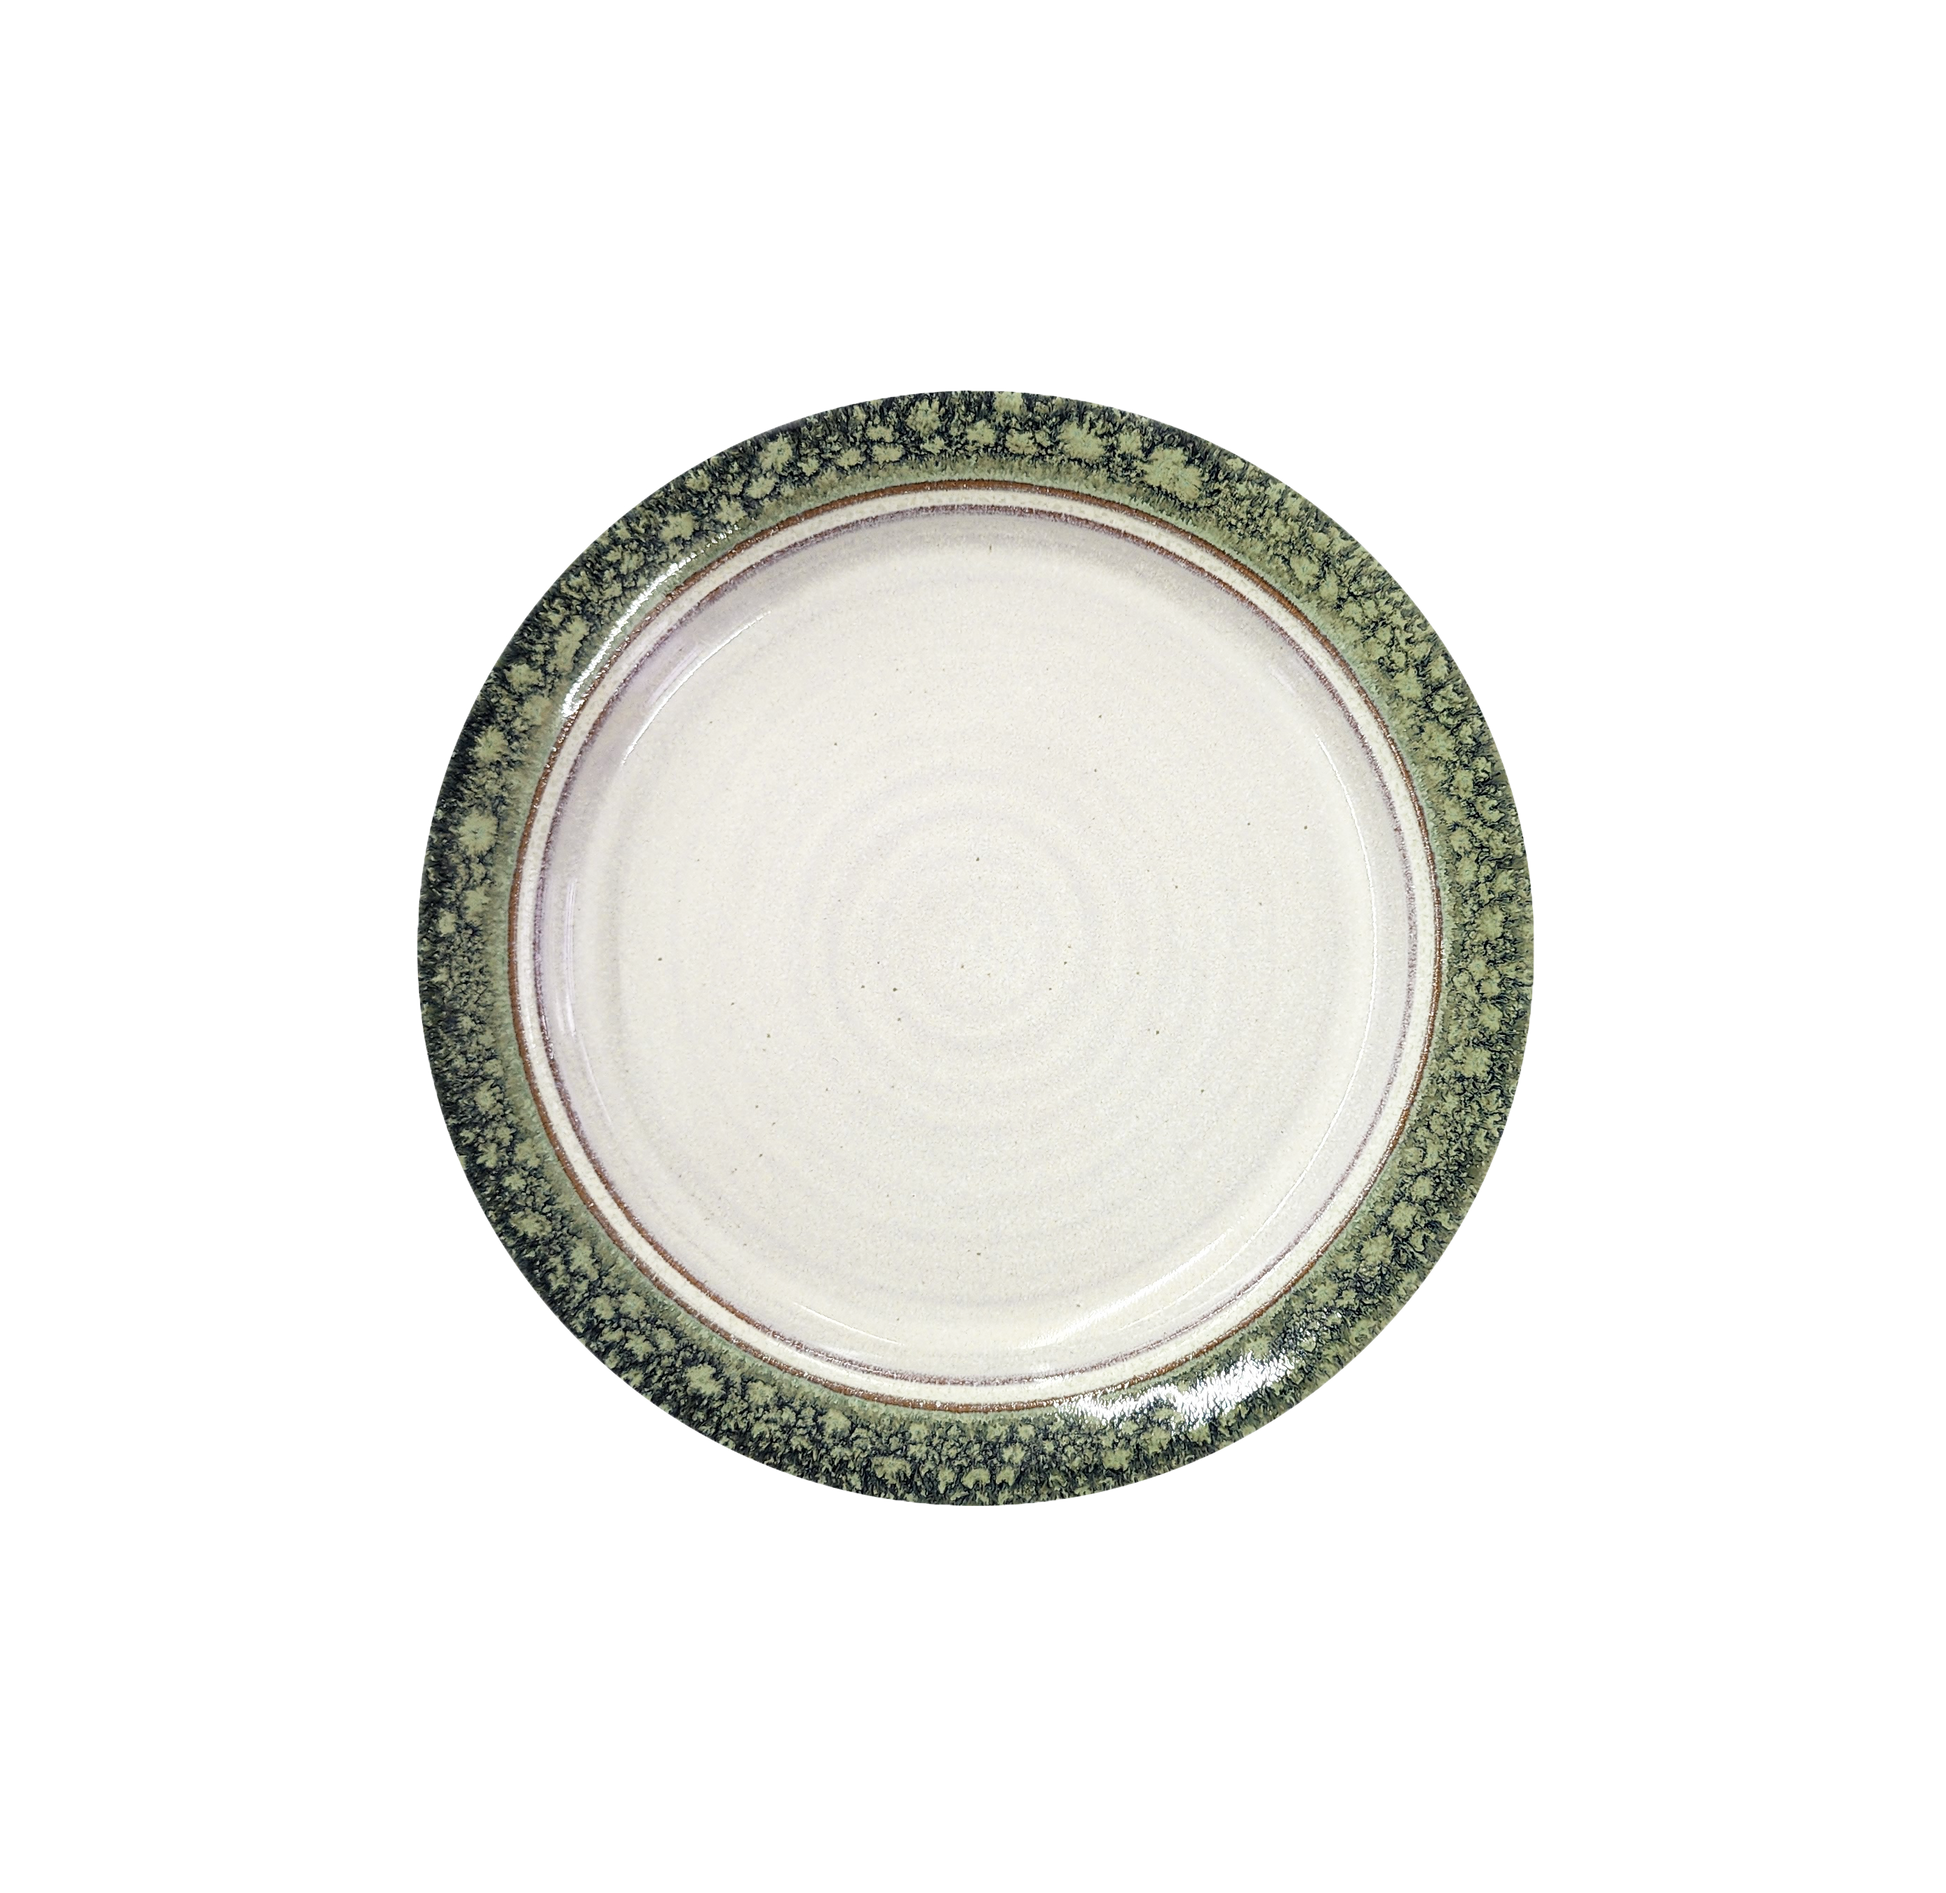 Image Description for Lunch Plate (8.5") in Froggy Bottom: A lunch plate from Clinton Pottery's Handmade Dinnerware Collection, featuring the unique "Froggy Bottom" glaze. The 8.5-inch plate showcases a blend of green, blue, and earthy tones, evoking the tranquil ambiance of a serene pond. Its versatile size is suitable for serving smaller meals or appetizers with a hint of rustic charm.